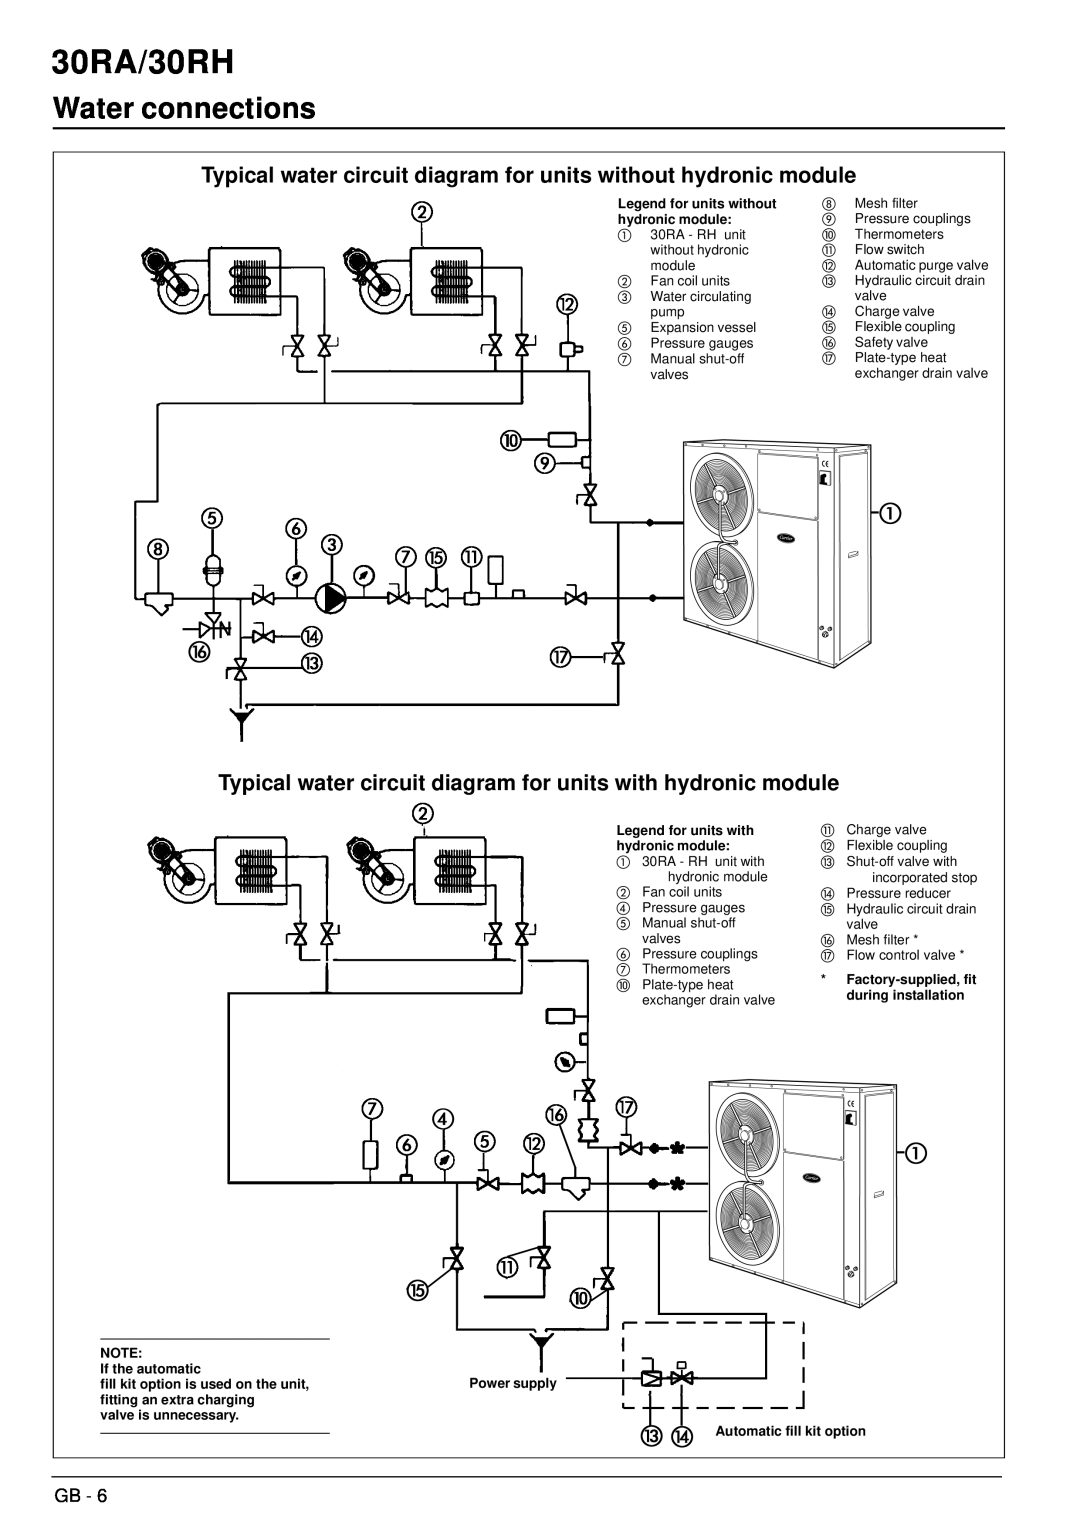 Carrier manual Water connections, 30RA/30RH 